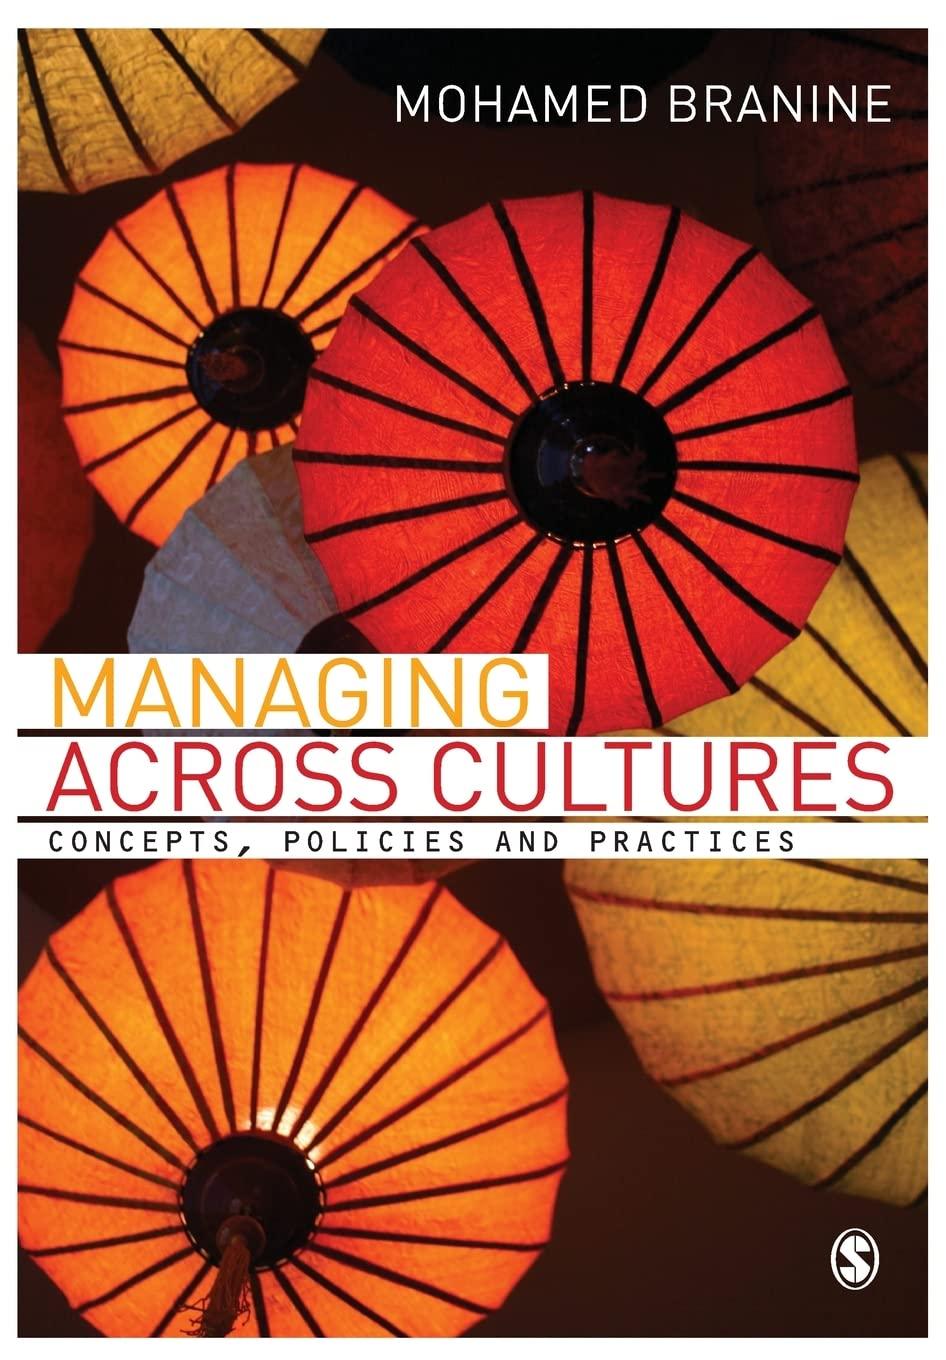 managing across cultures concepts policies and practices 1st edition mohamed branine 1849207291,